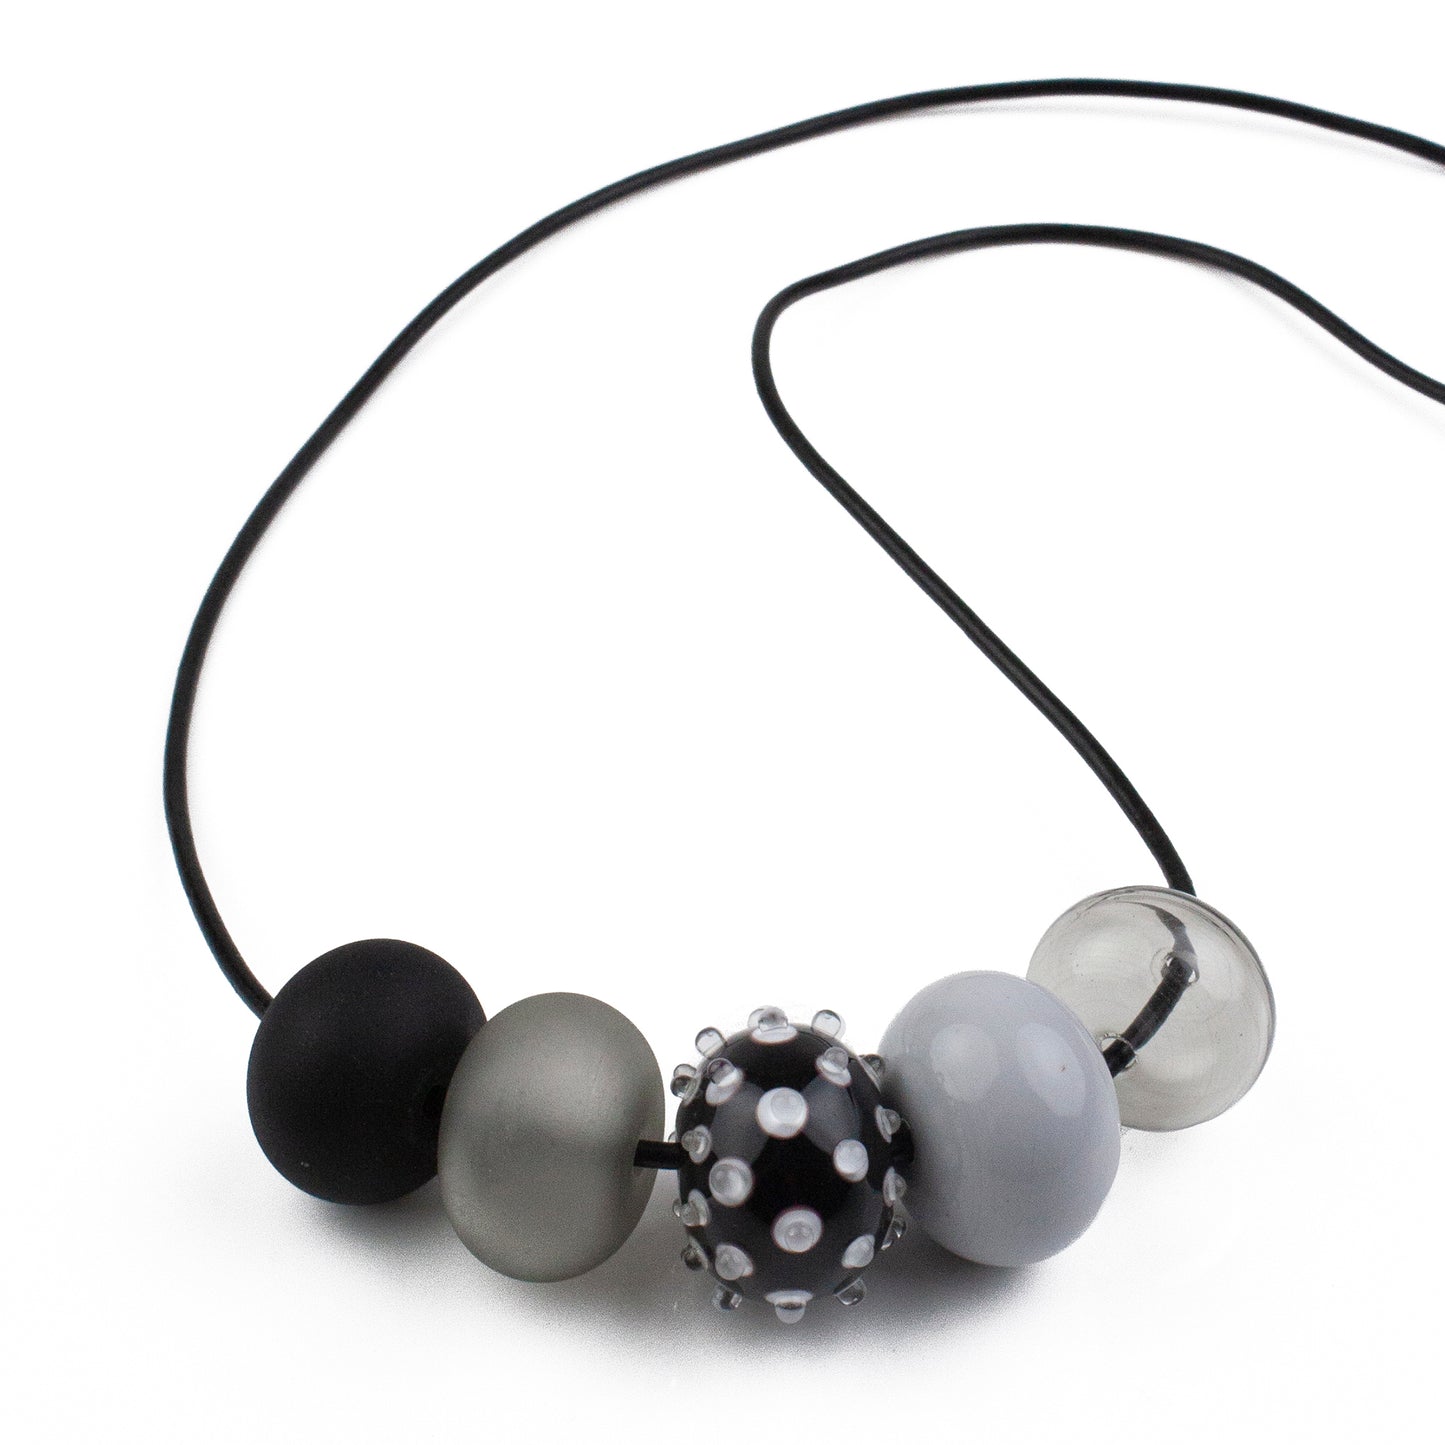 5 bubble bead necklace - black and white with focal bead